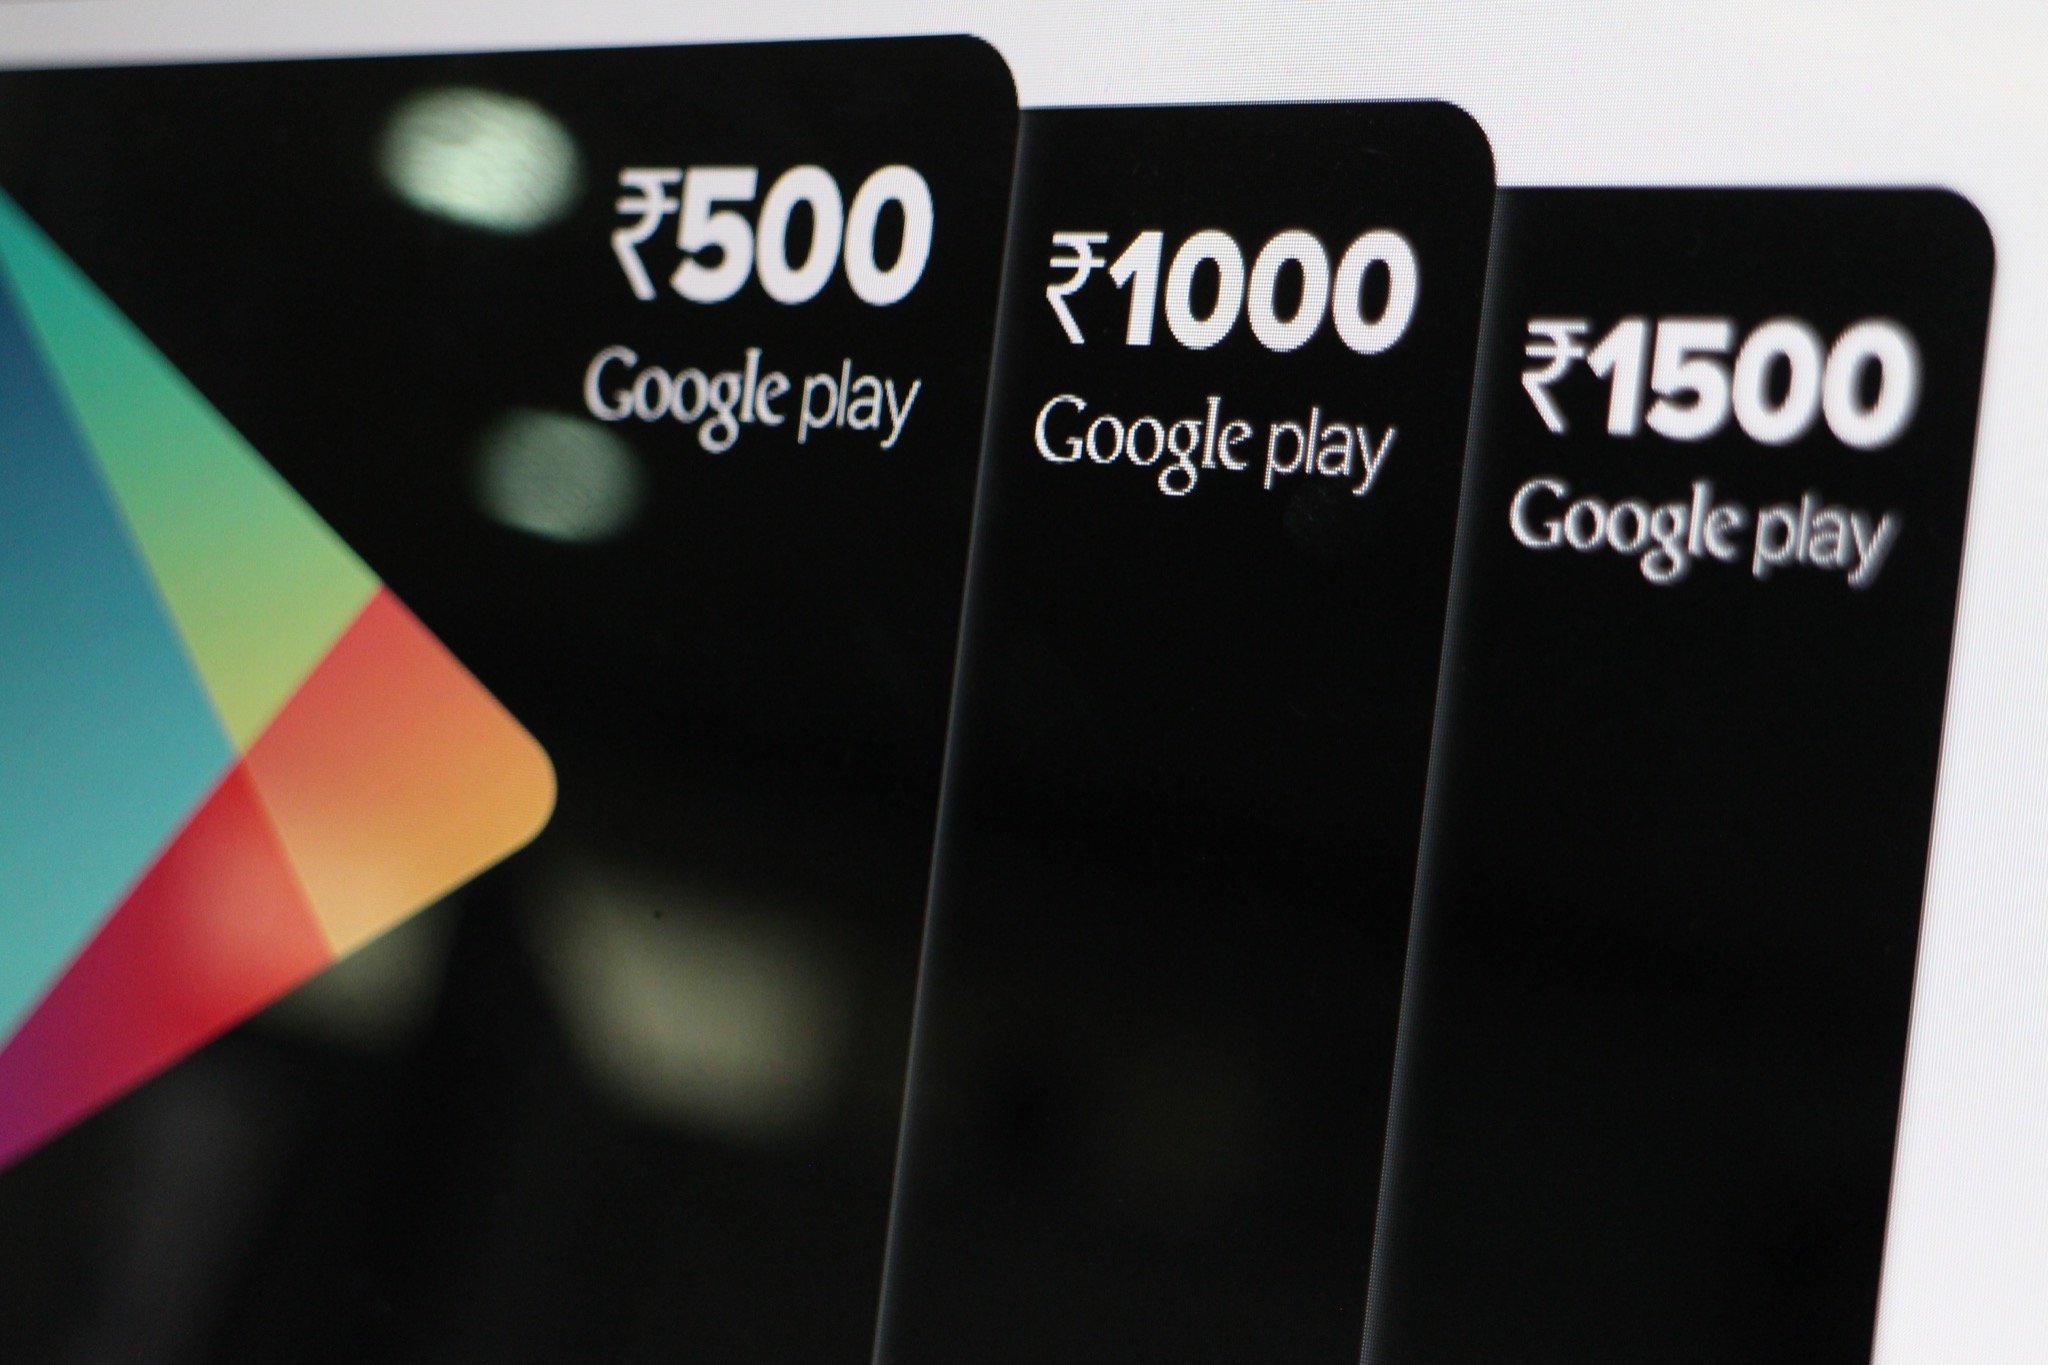 Google Play gift cards are now available in India